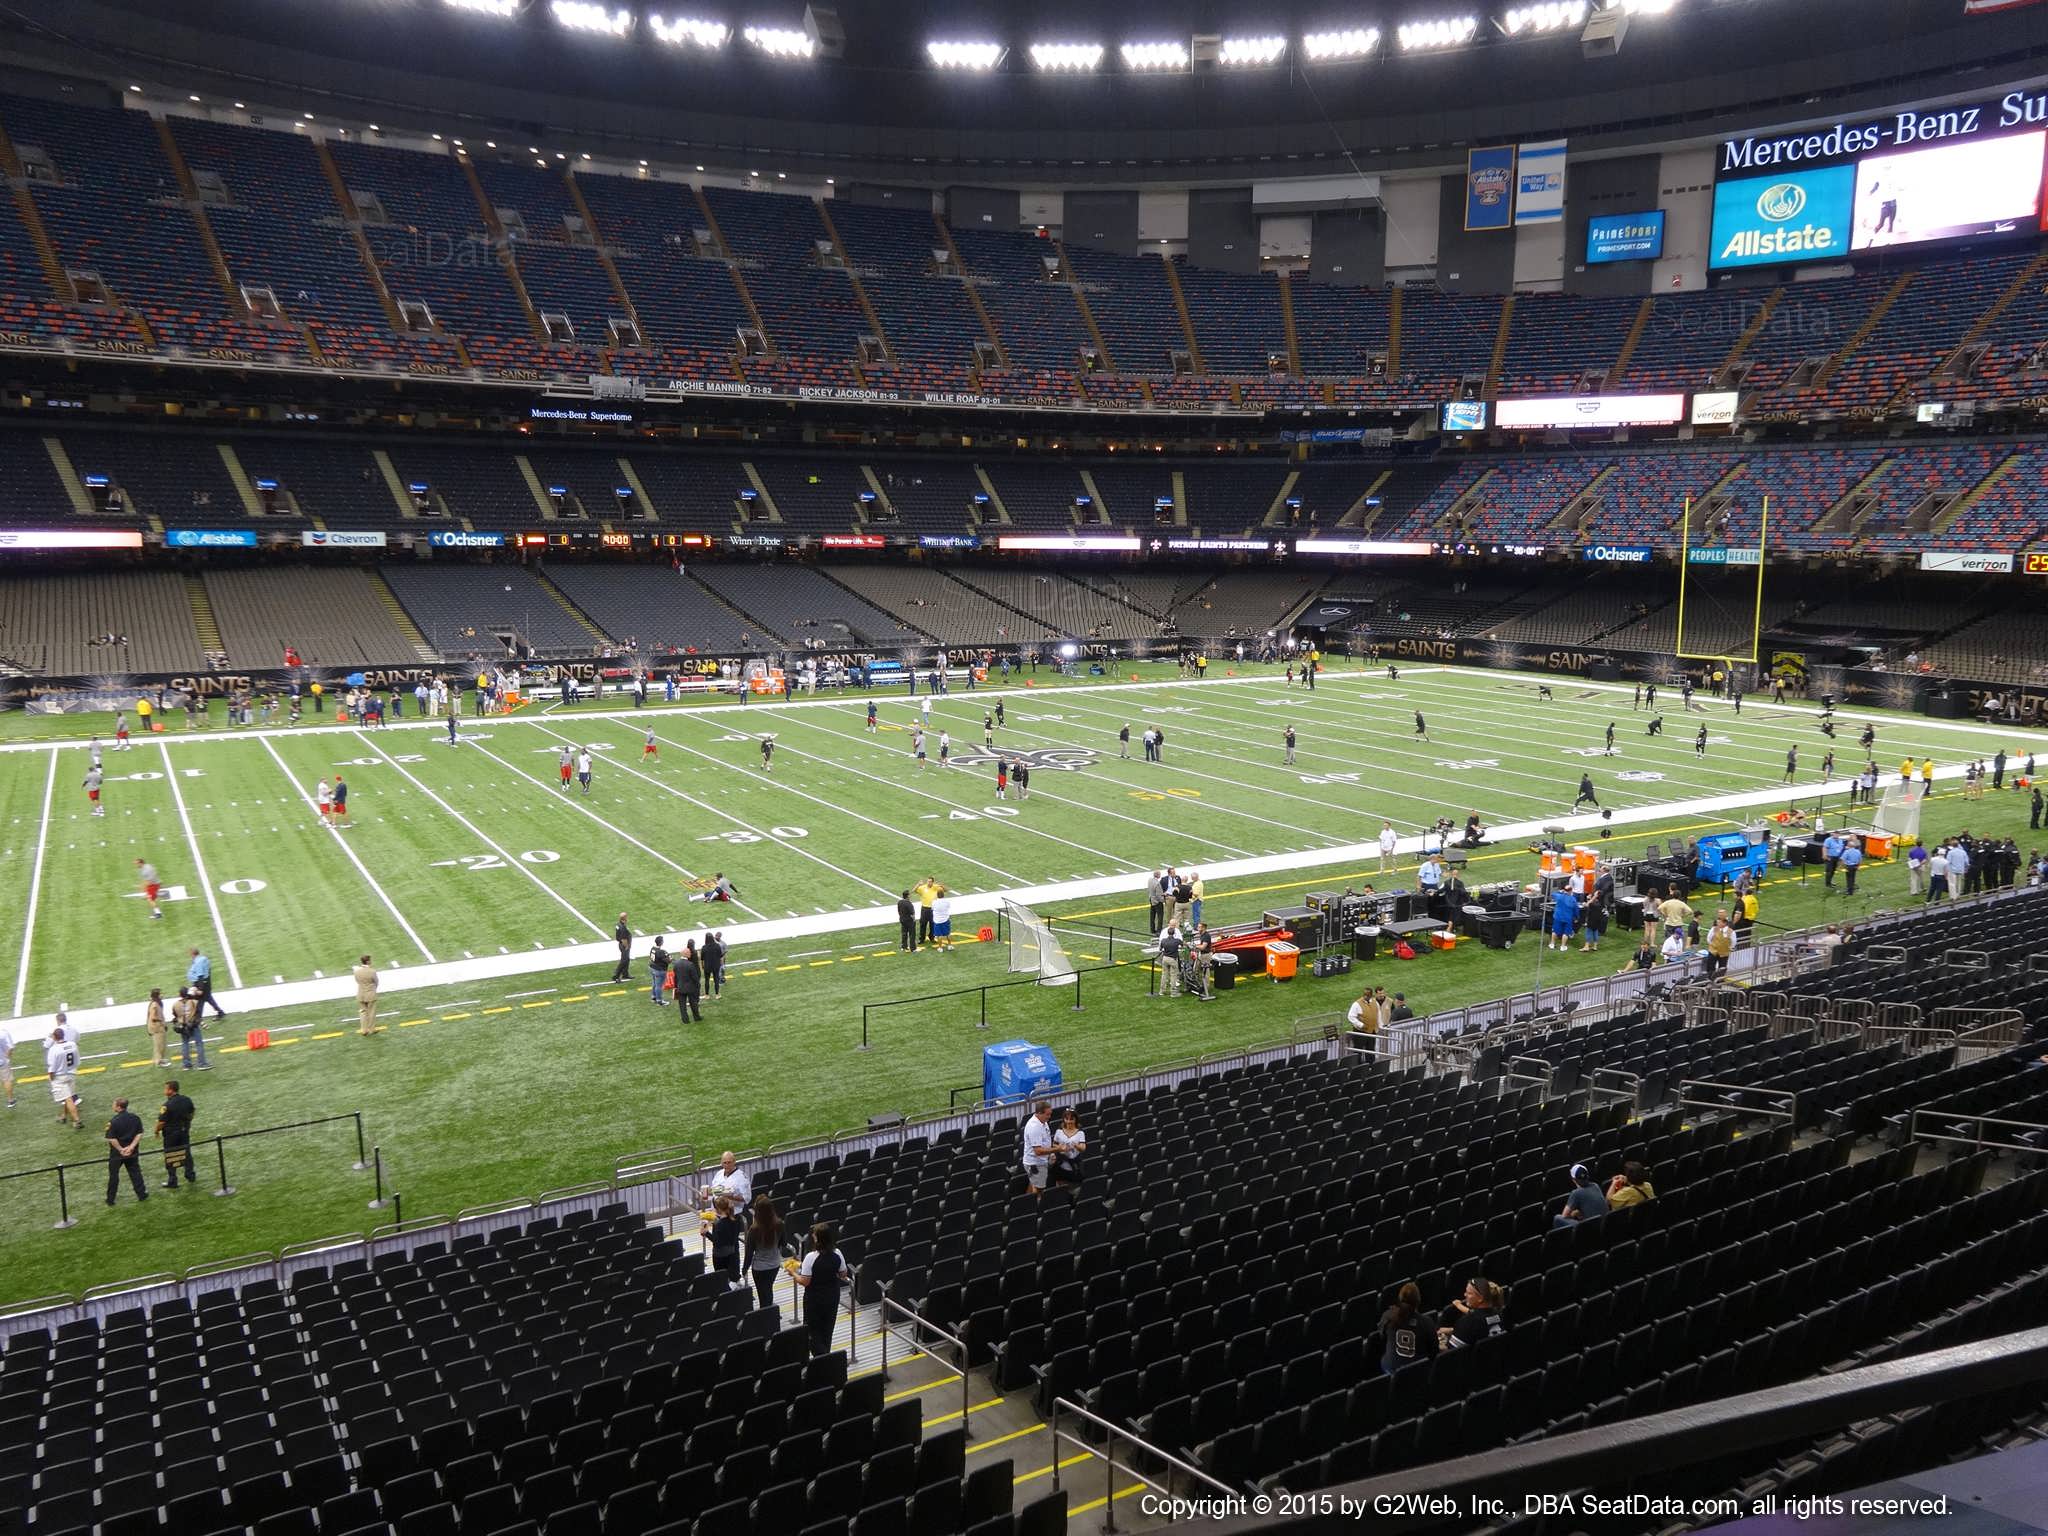 Seat view from section 271 at the Mercedes-Benz Superdome, home of the New Orleans Saints